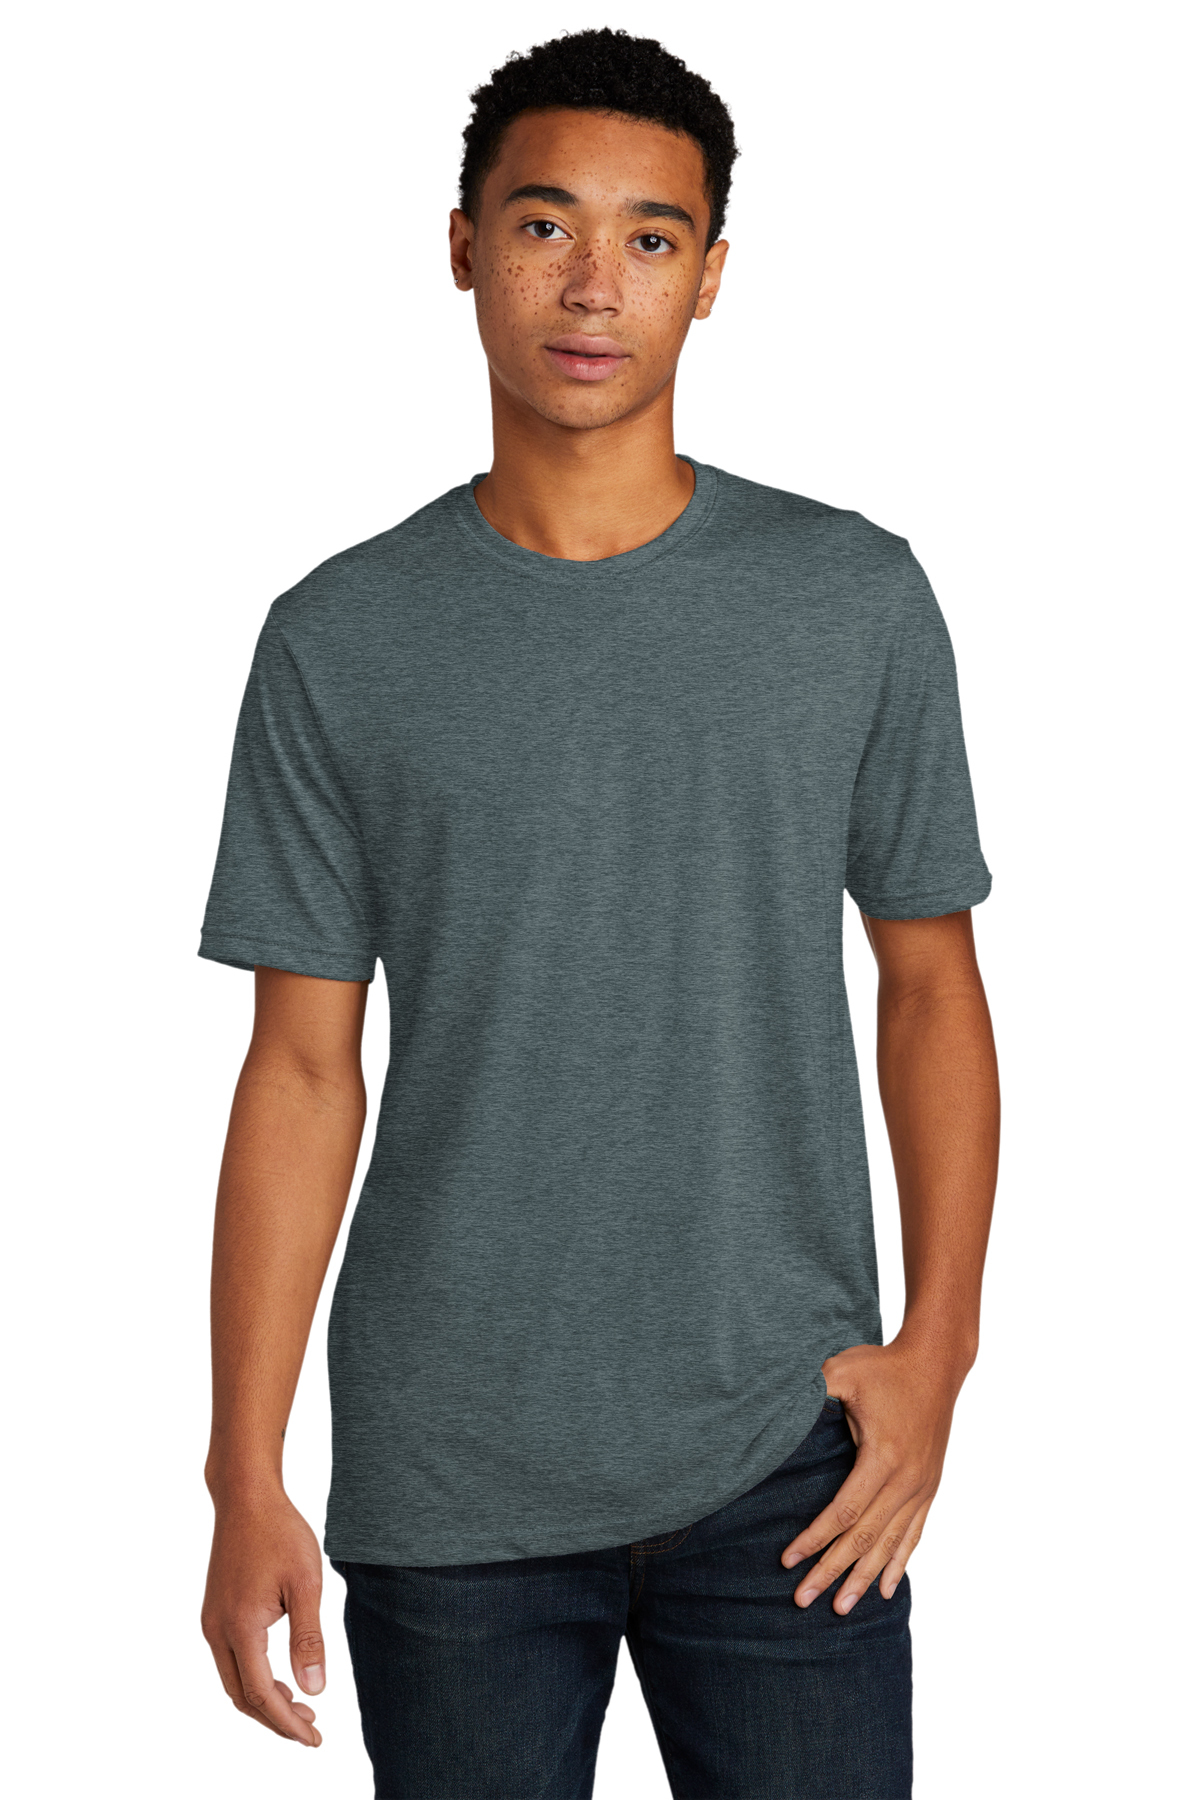 Next Level Apparel Unisex Poly/Cotton Tee, Product